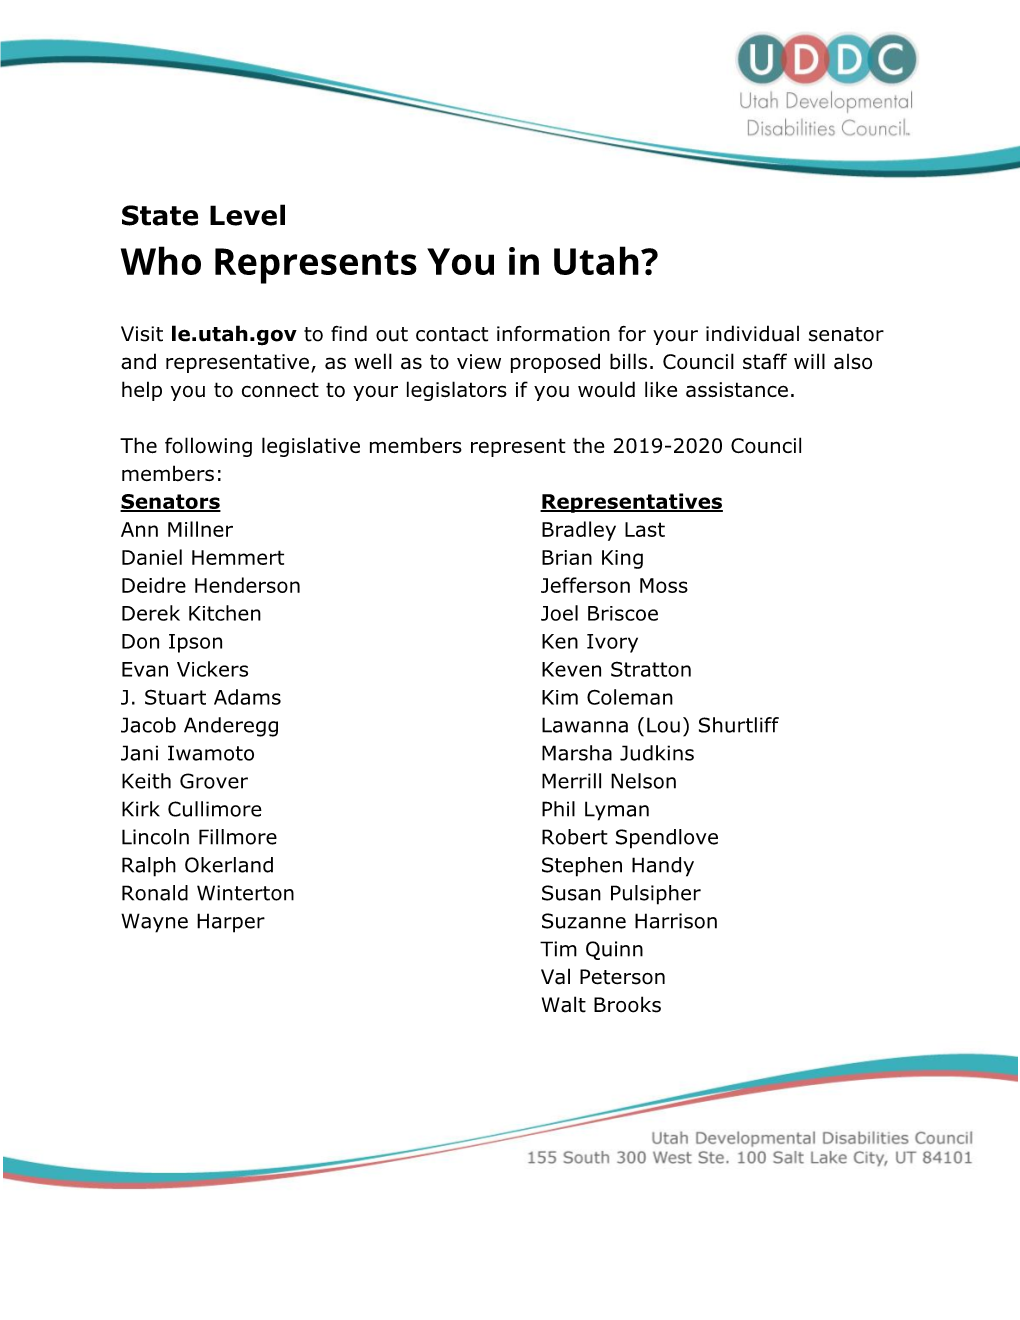 State Level Who Represents You in Utah?